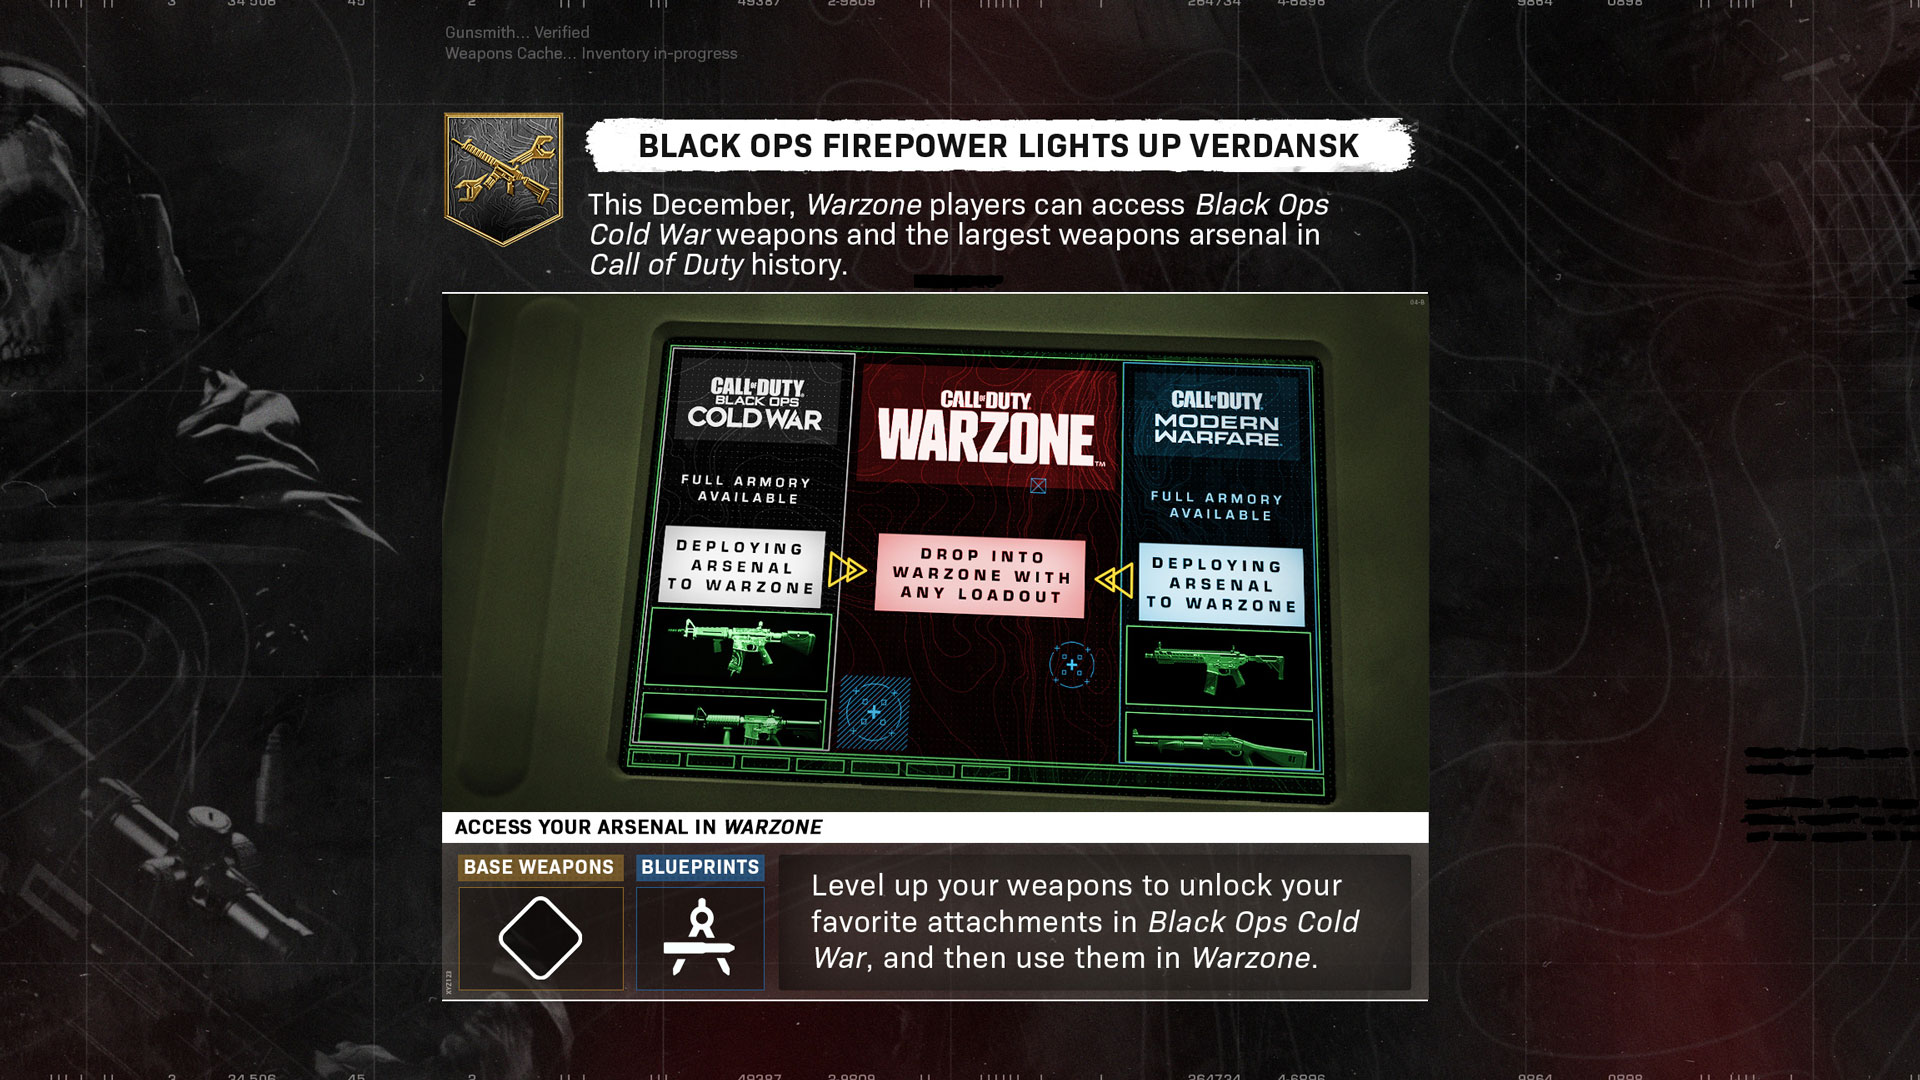 Introducing a game-changing FREE-TO-PLAY experience - Call of Duty®: Warzone